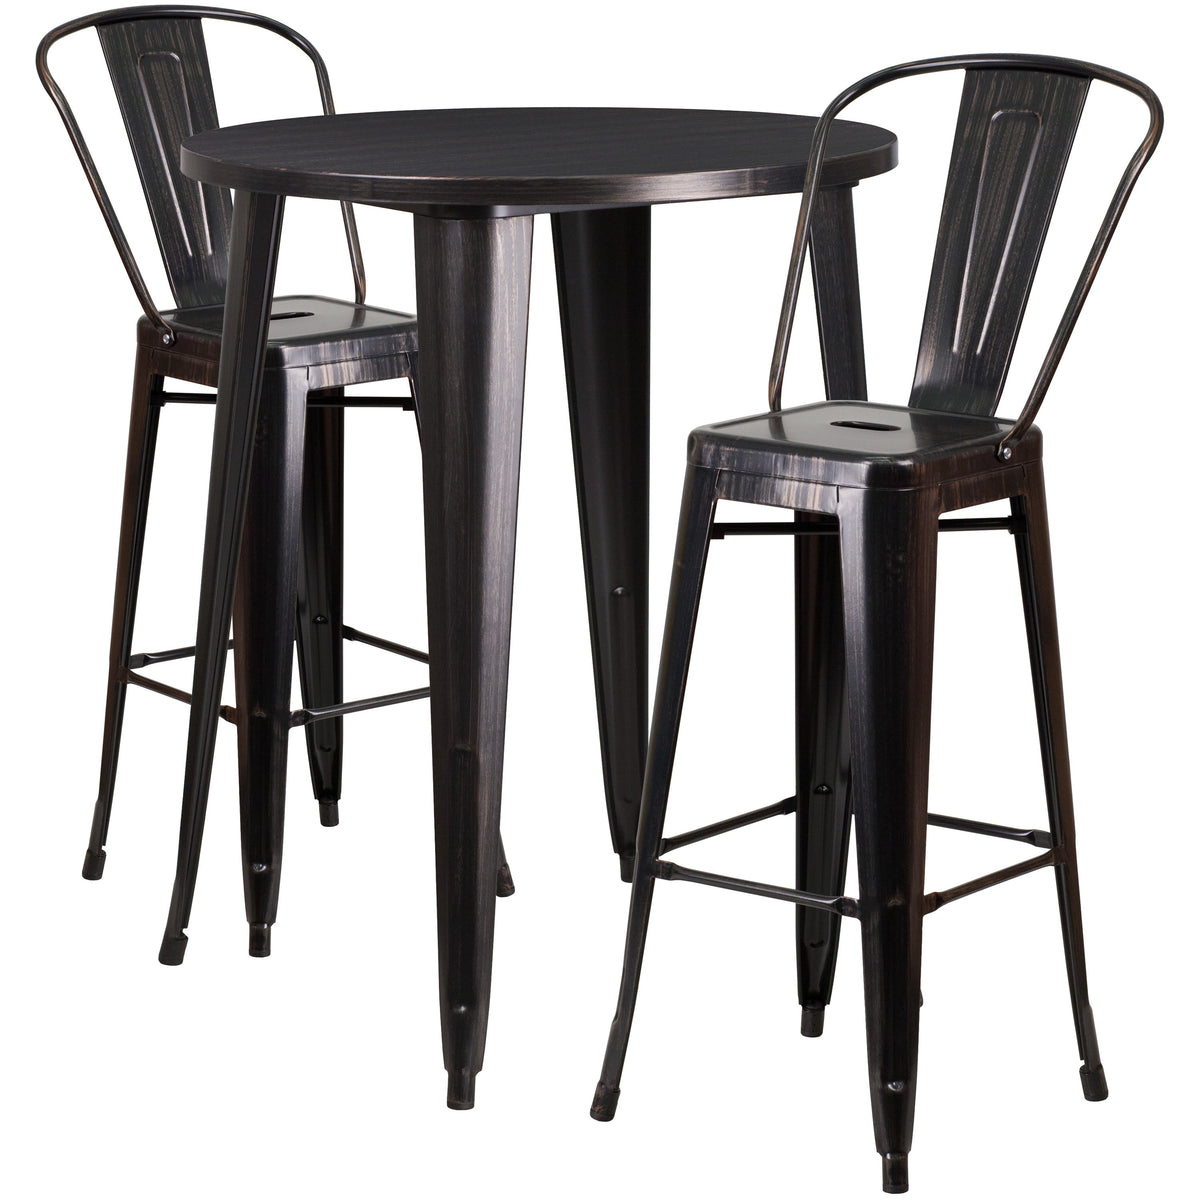 Black-Antique Gold |#| 30inch Round Black-Gold Metal Indoor-Outdoor Bar Table Set with 2 Cafe Stools